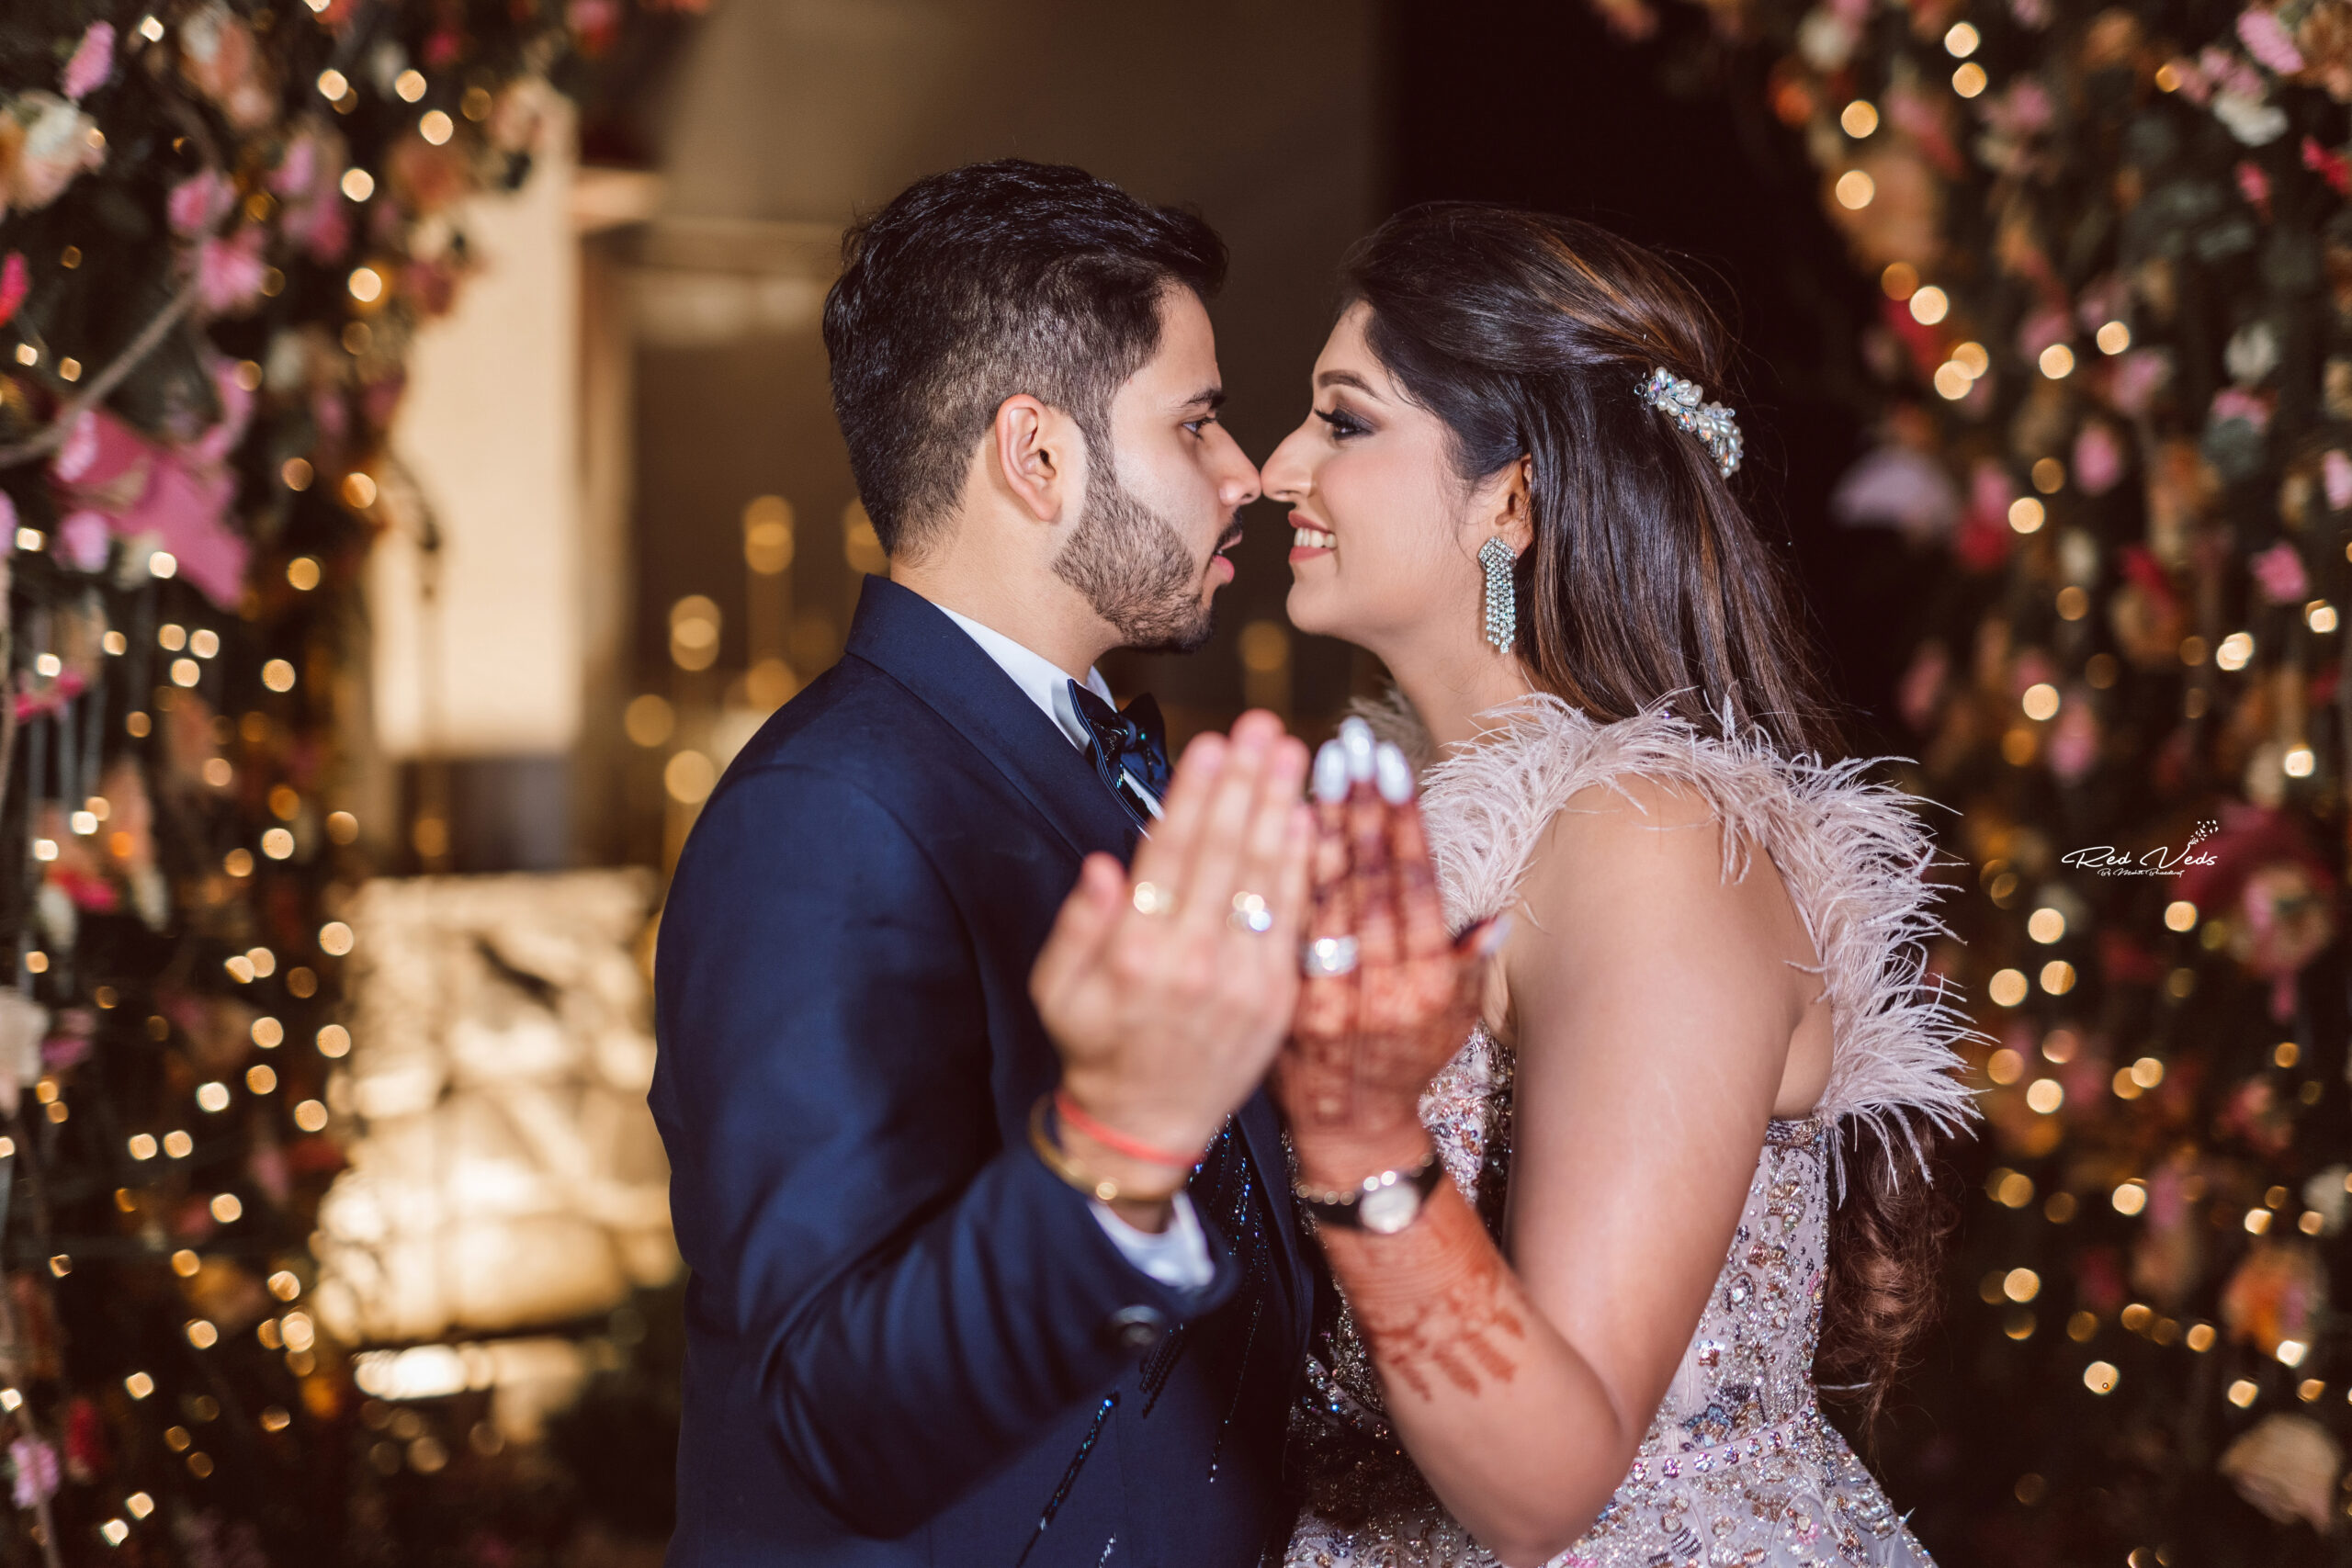 Indian Wedding Photography - Shan Photography | Engagement photography poses,  Indian wedding photography poses, Indian wedding photography